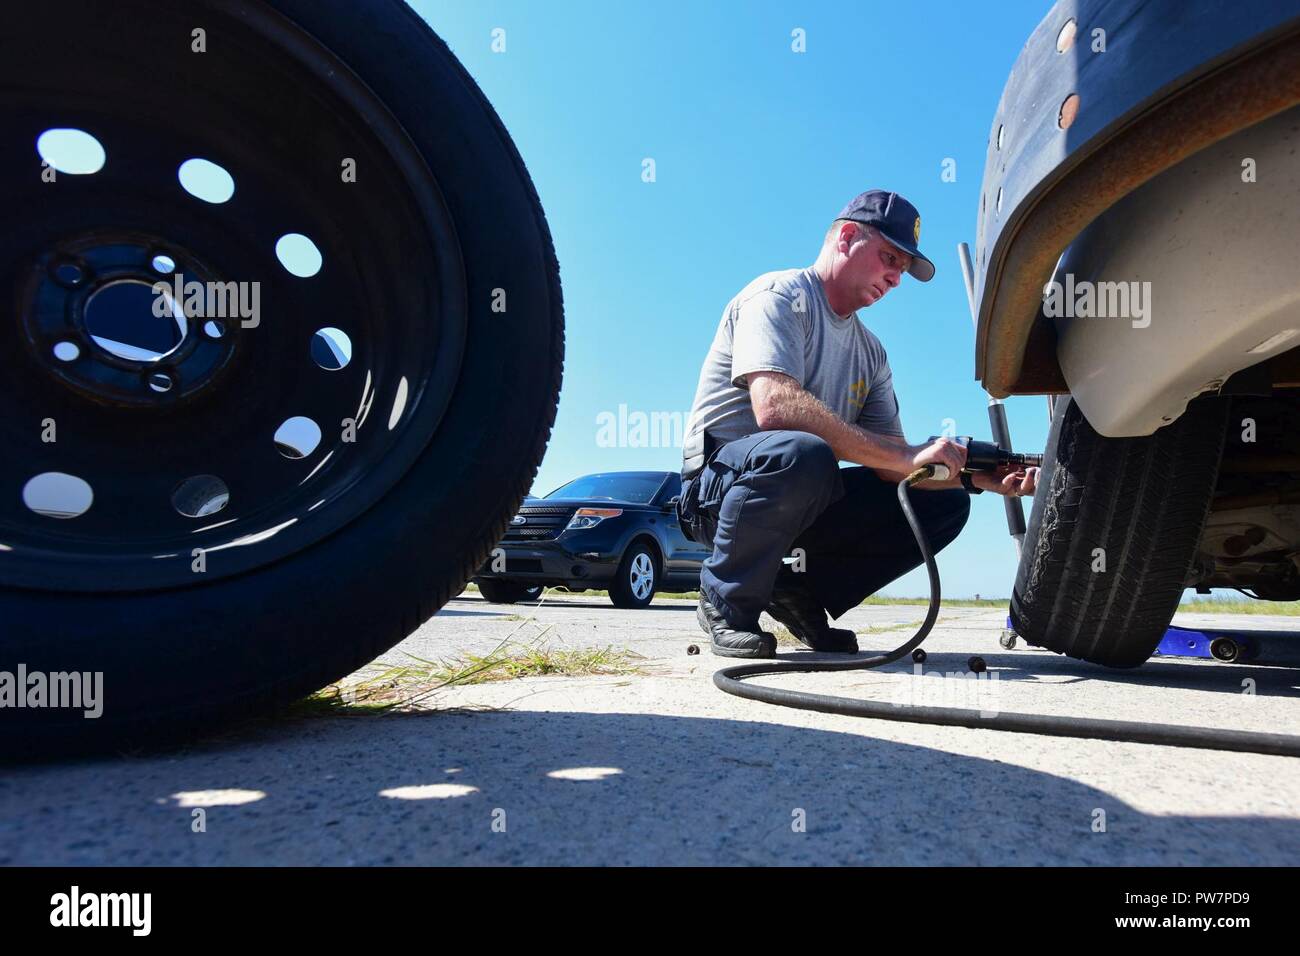 Cpl. Tim Bush, an instructor with the South Carolina Highway Patrol Training Unit, changes a tire on a car during Precision Immobilization Technique training at McEntire Joint National Guard Base, S.C., Sept. 27, 2017. McEntire JNGB, home to the South Carolina Air National Guard’s 169th Fighter Wing, partners with local law enforcement allowing them to utilize sections of the base for necessary training, enhancing the partnership between the SCANG and the S.C. Highway Patrol. Stock Photo